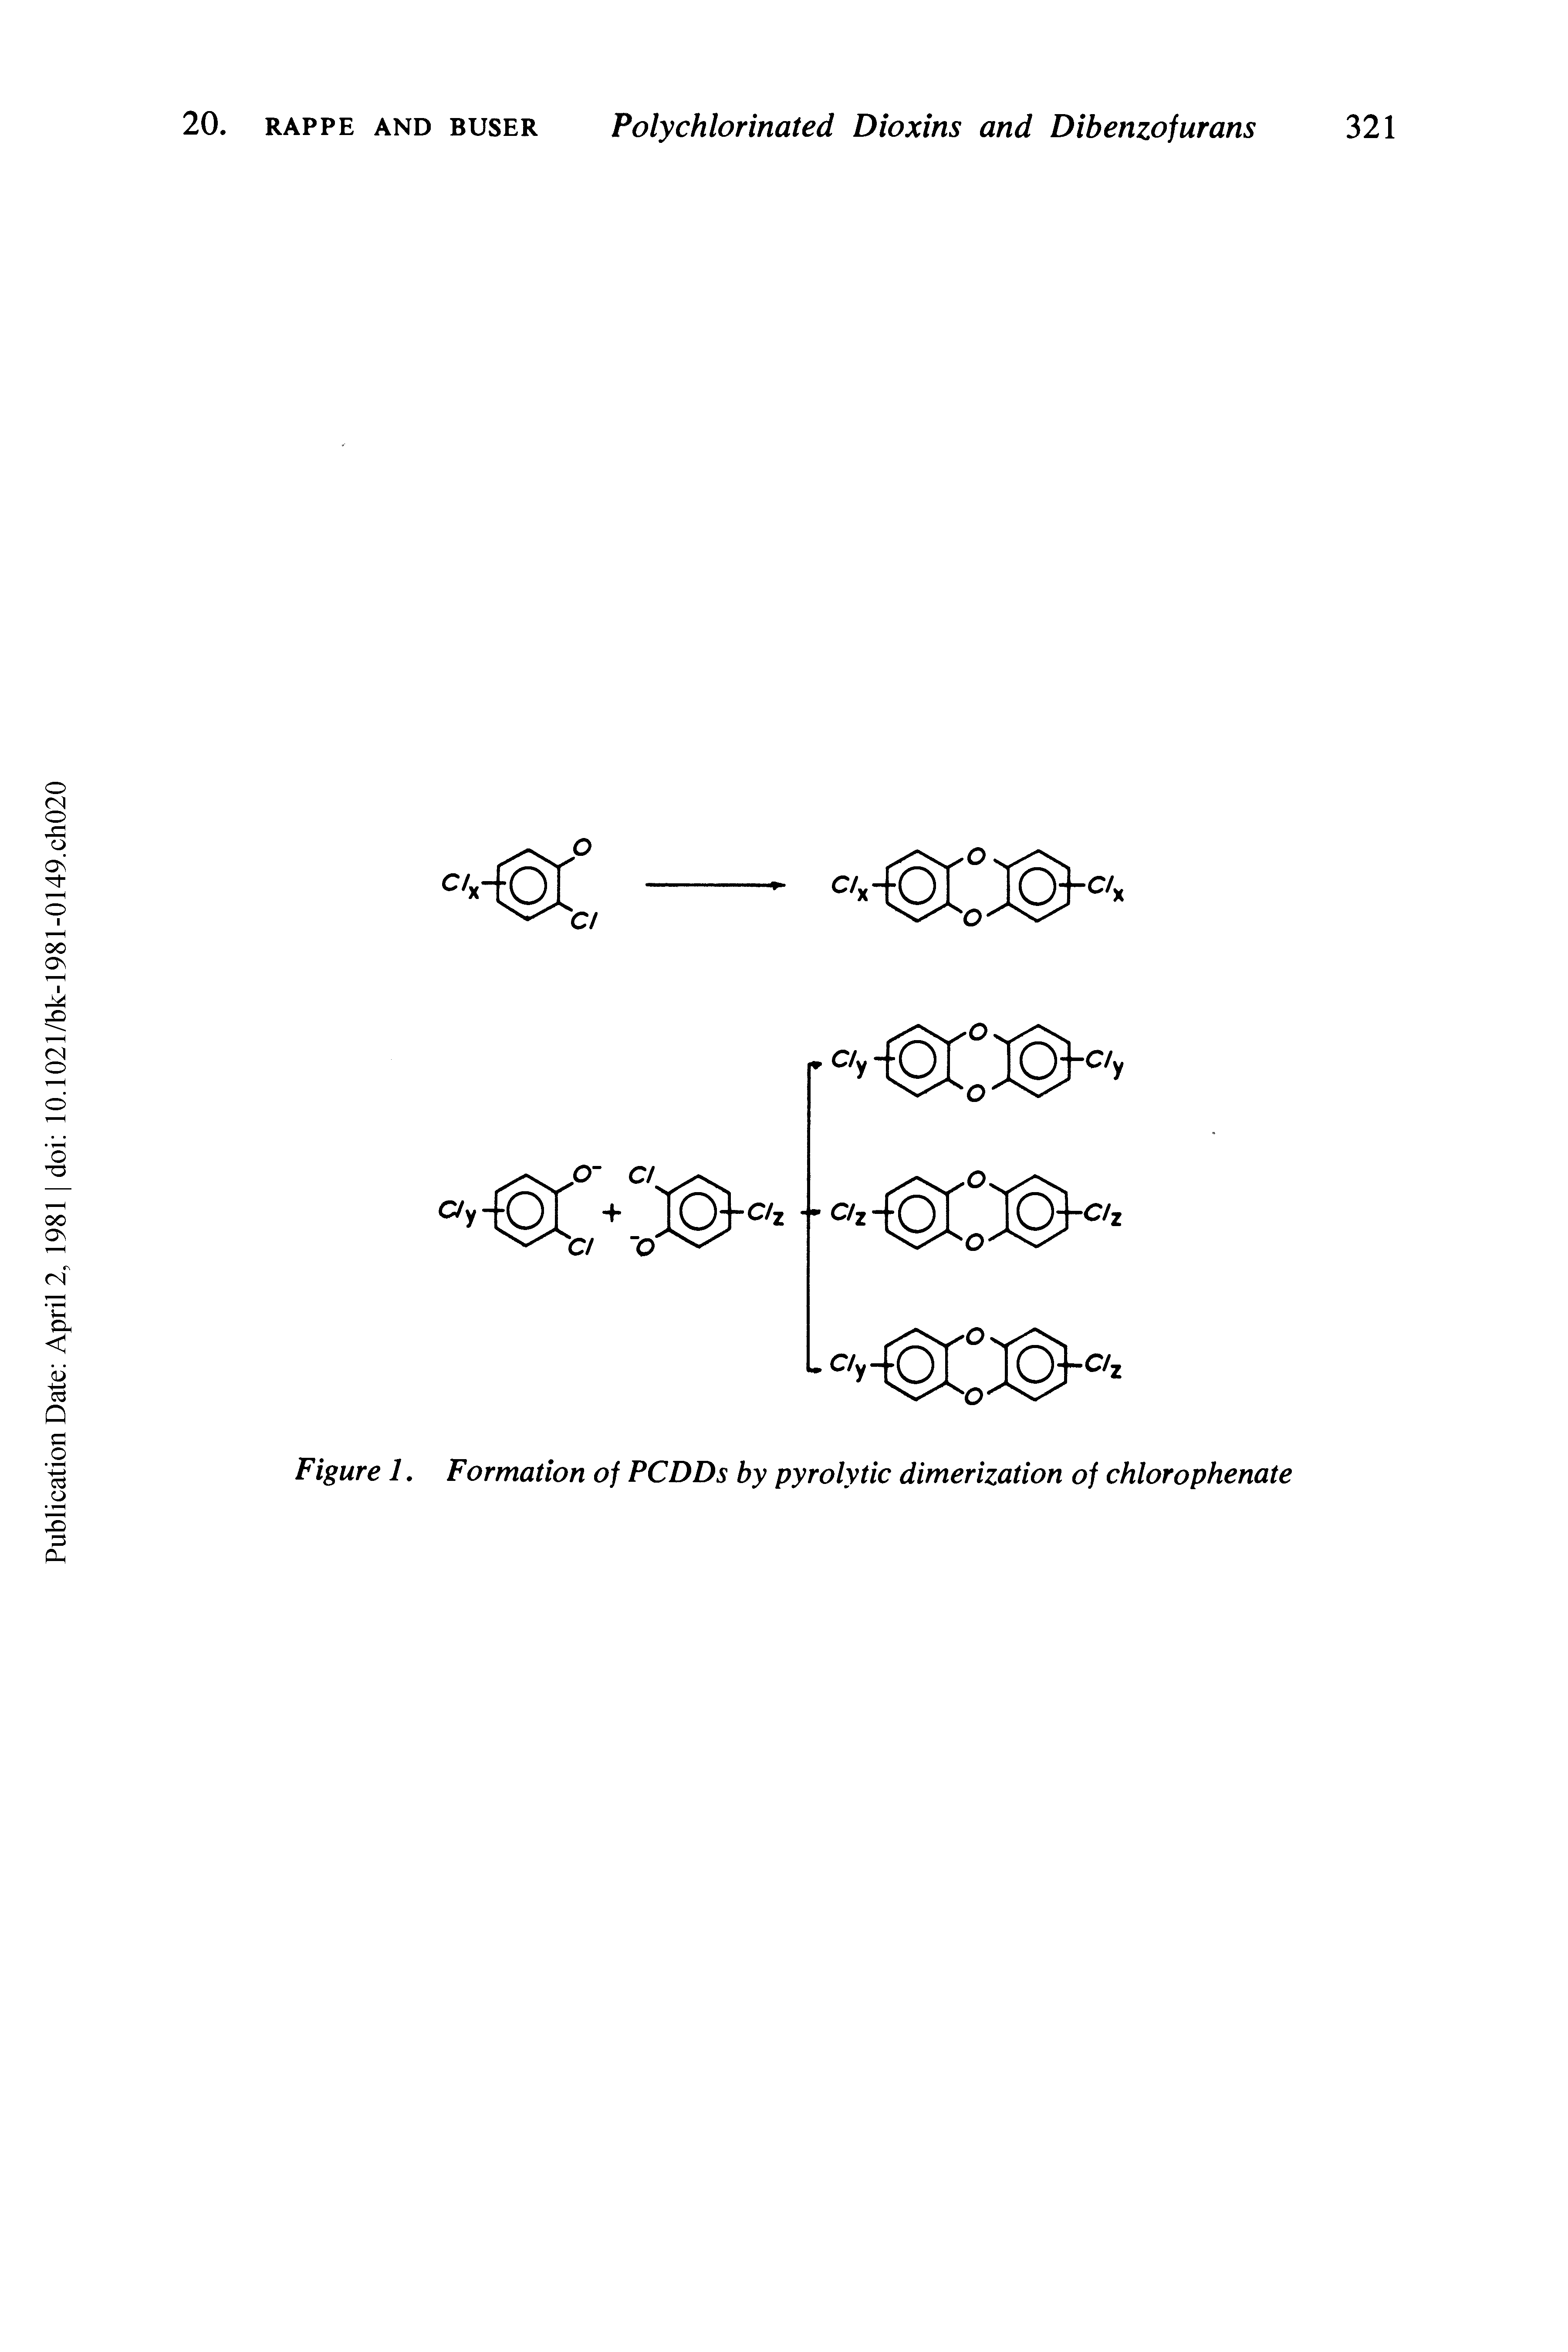 Figure 1. Formation of PCDDs by pyrolytic dimerization of chlorophenate...